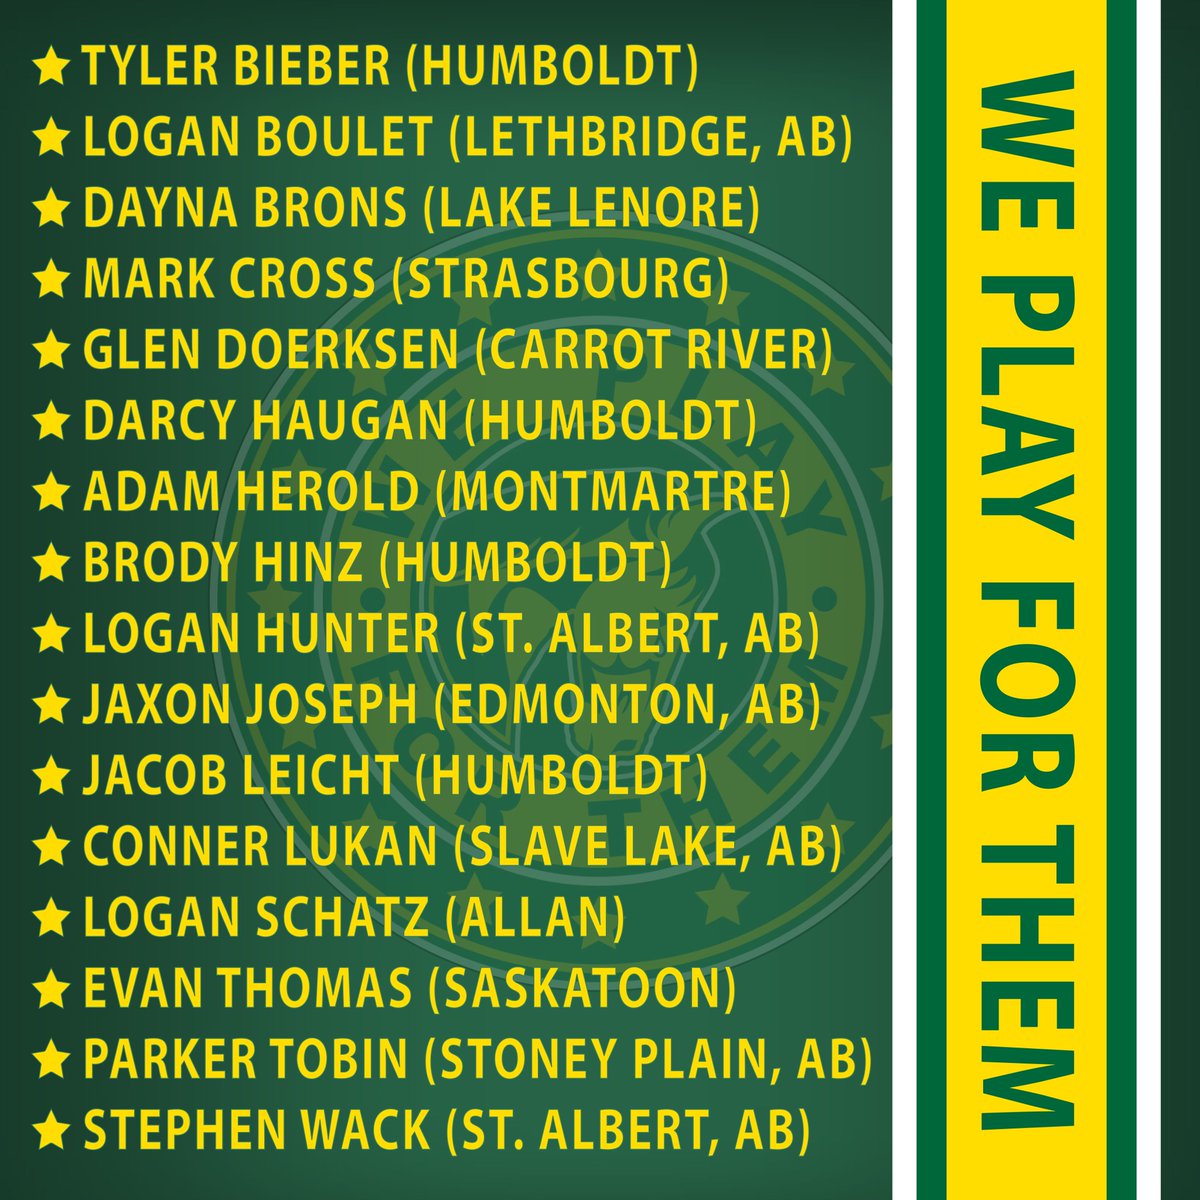 As @theSJHL season opens tonight from Humboldt. The resilience and courage of the community will be on full display. Tonight and forevermore... 🏒 WE PLAY FOR THEM 🏒 April 6th, 2018 💚💛💚 Always remembered 💚💛💚 Always #HumboldtStrong